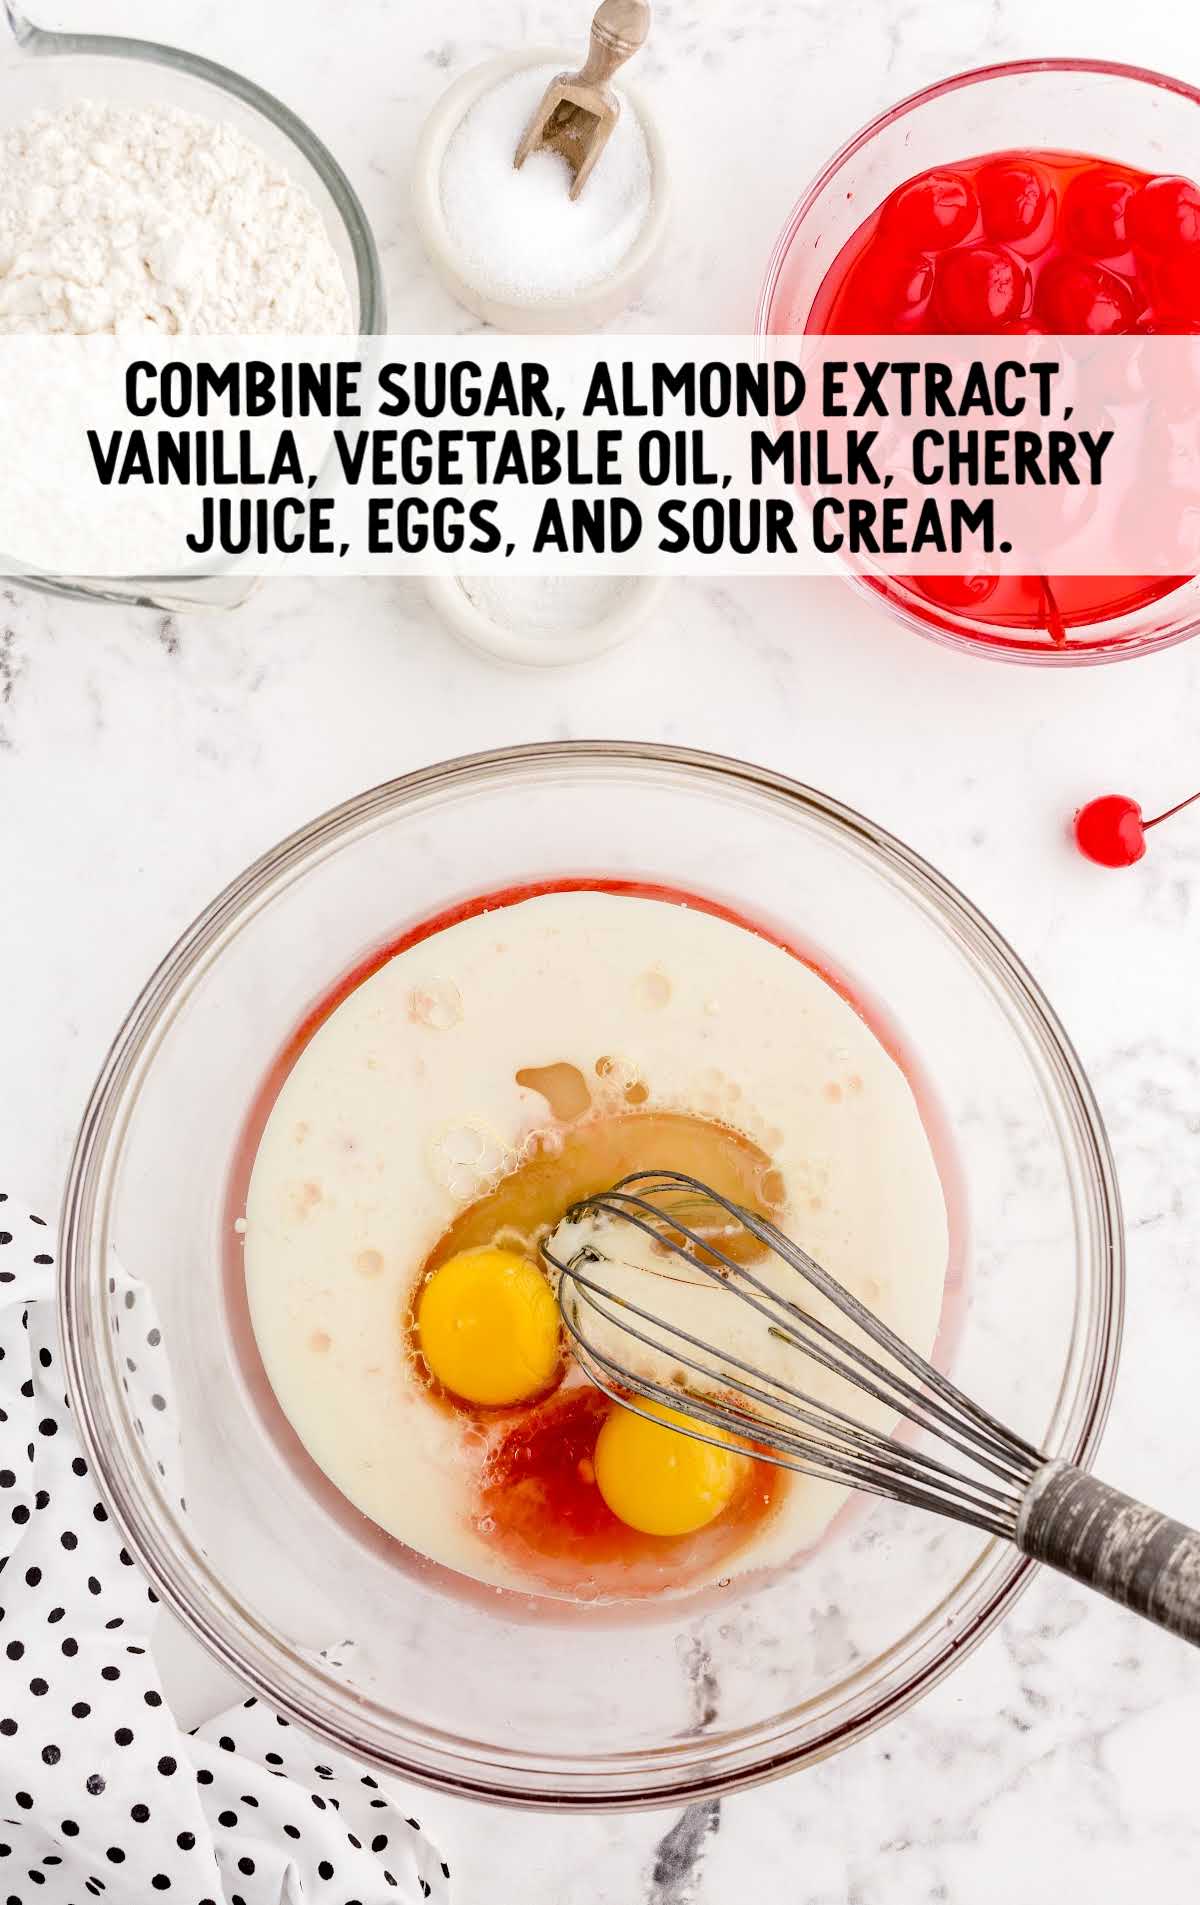 sugar, almond extract, vanilla, vegetable oil, milk, cherry juice, eggs, and sour cream whisked together in a bowl